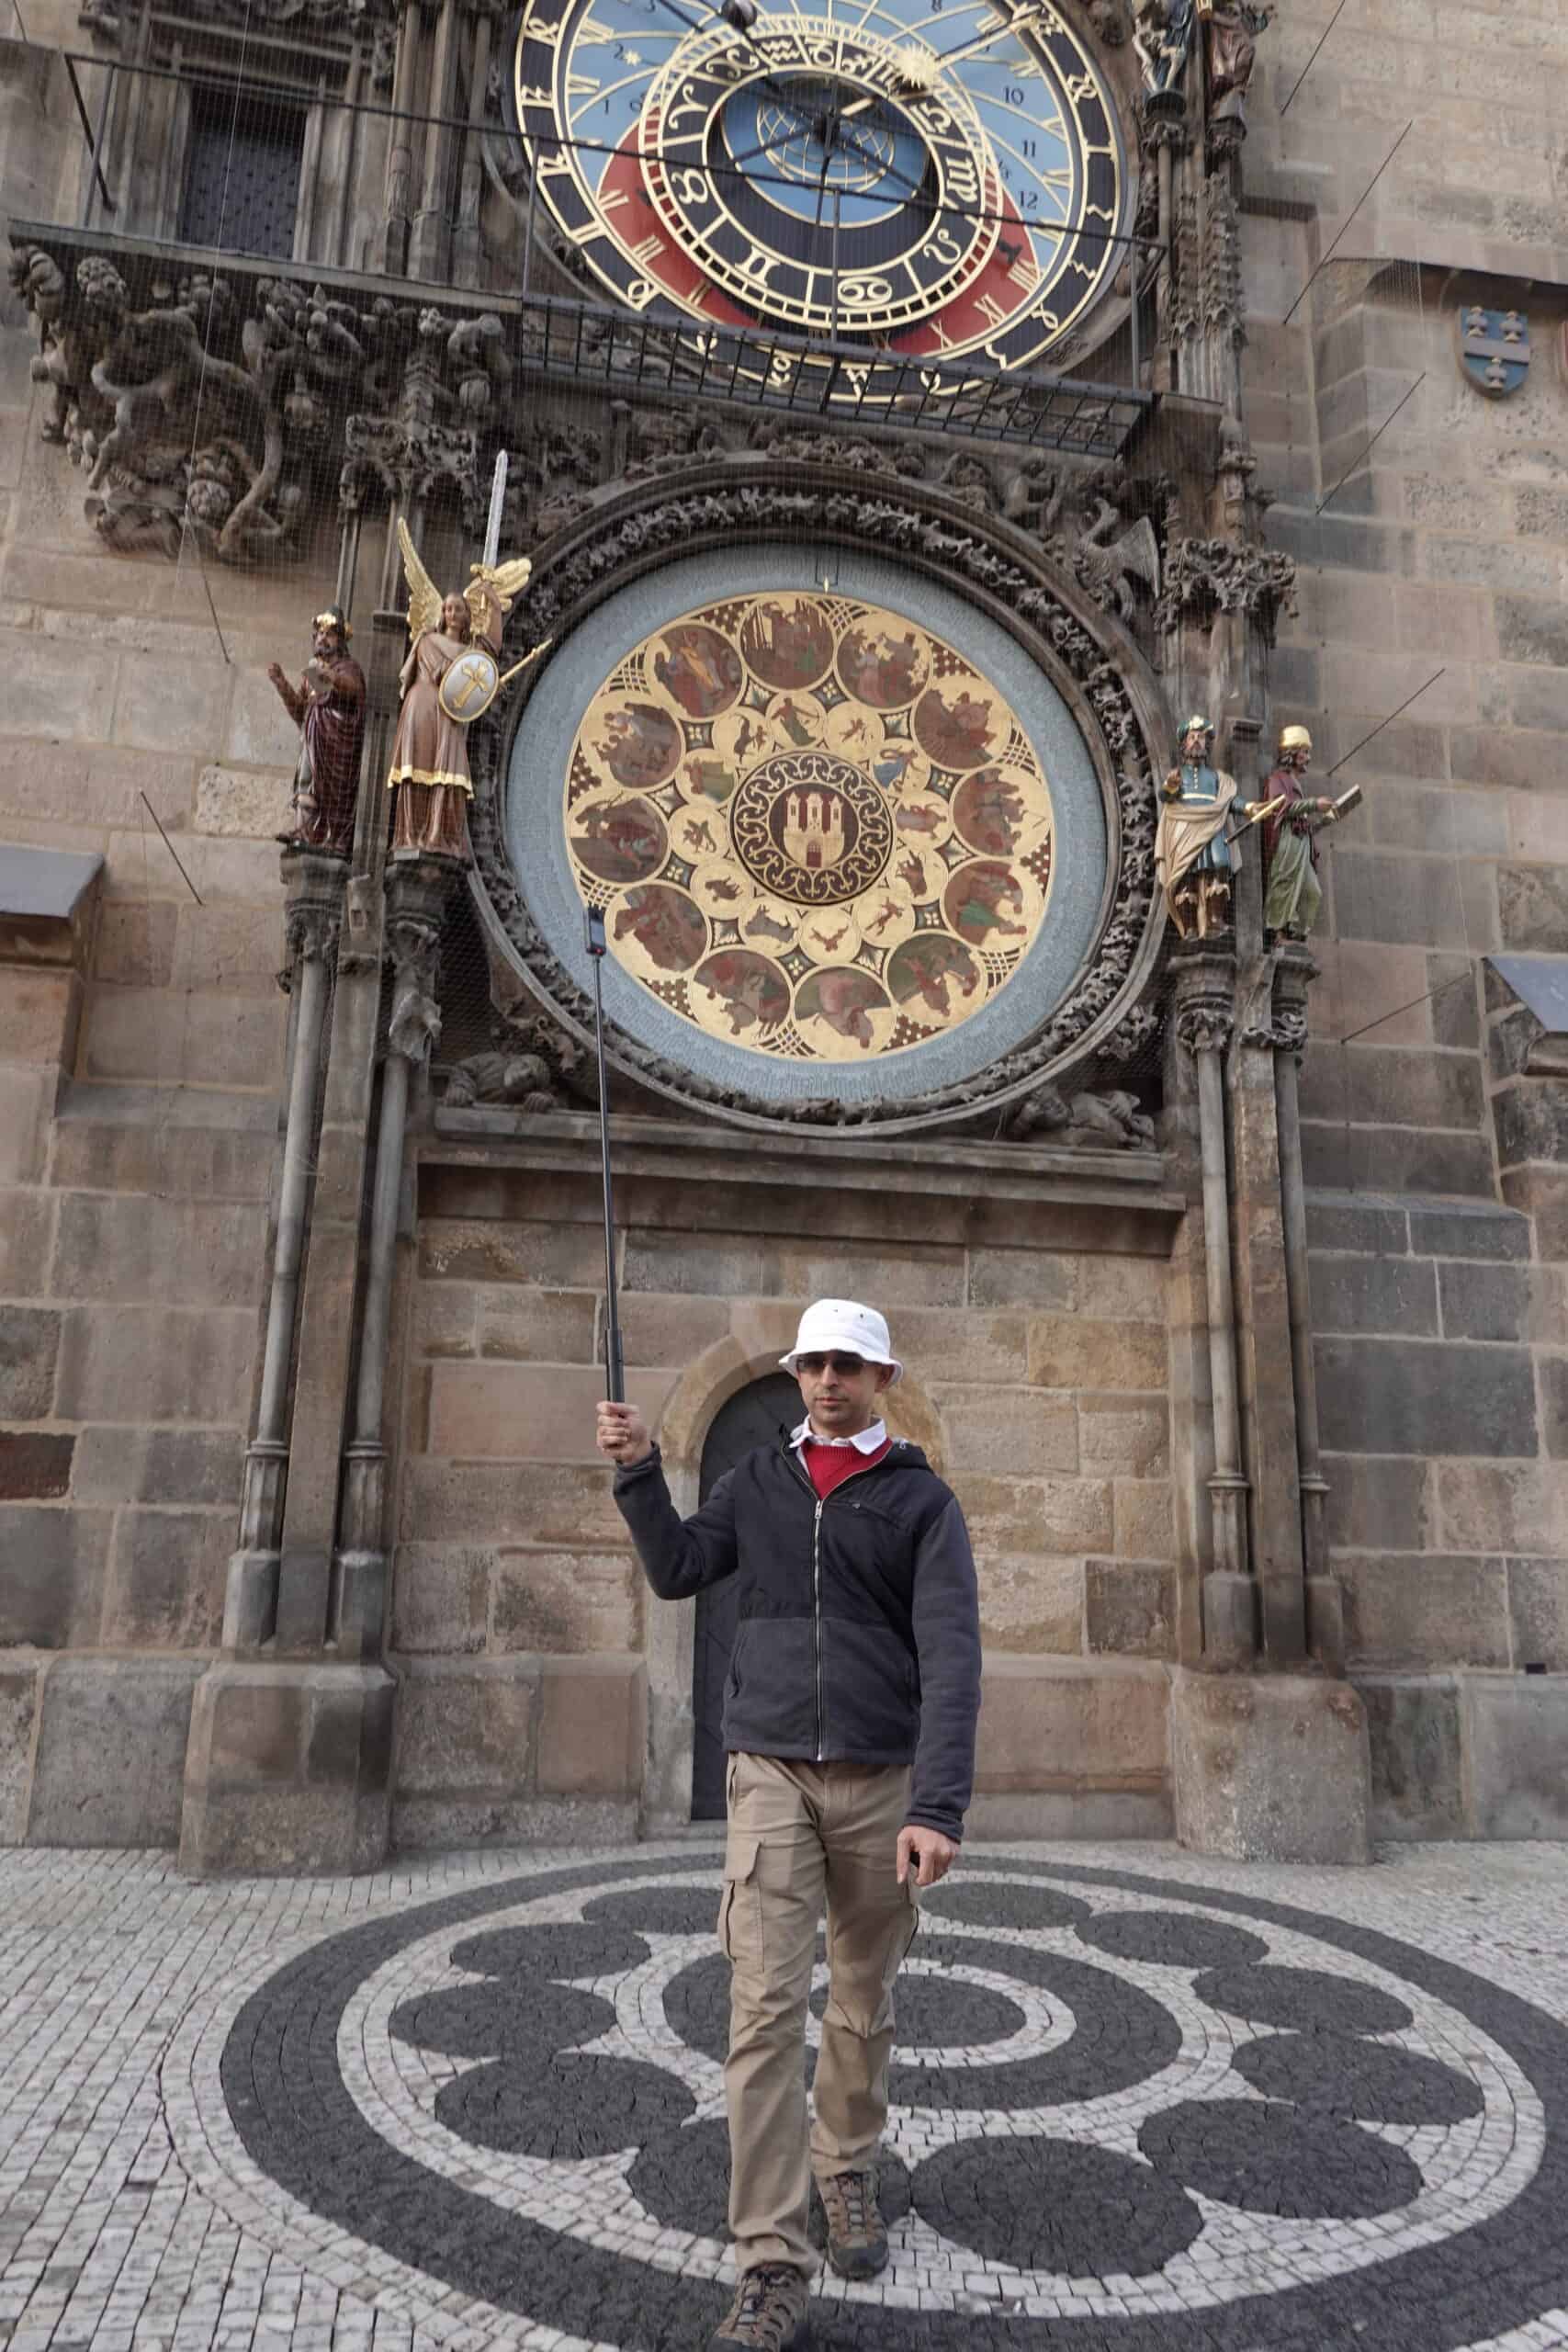 Filming with my 360 camera above my head on a selfie stick : Me casually walking away while filming Prague astronomical clock with my Insta360 X3 while travelling.